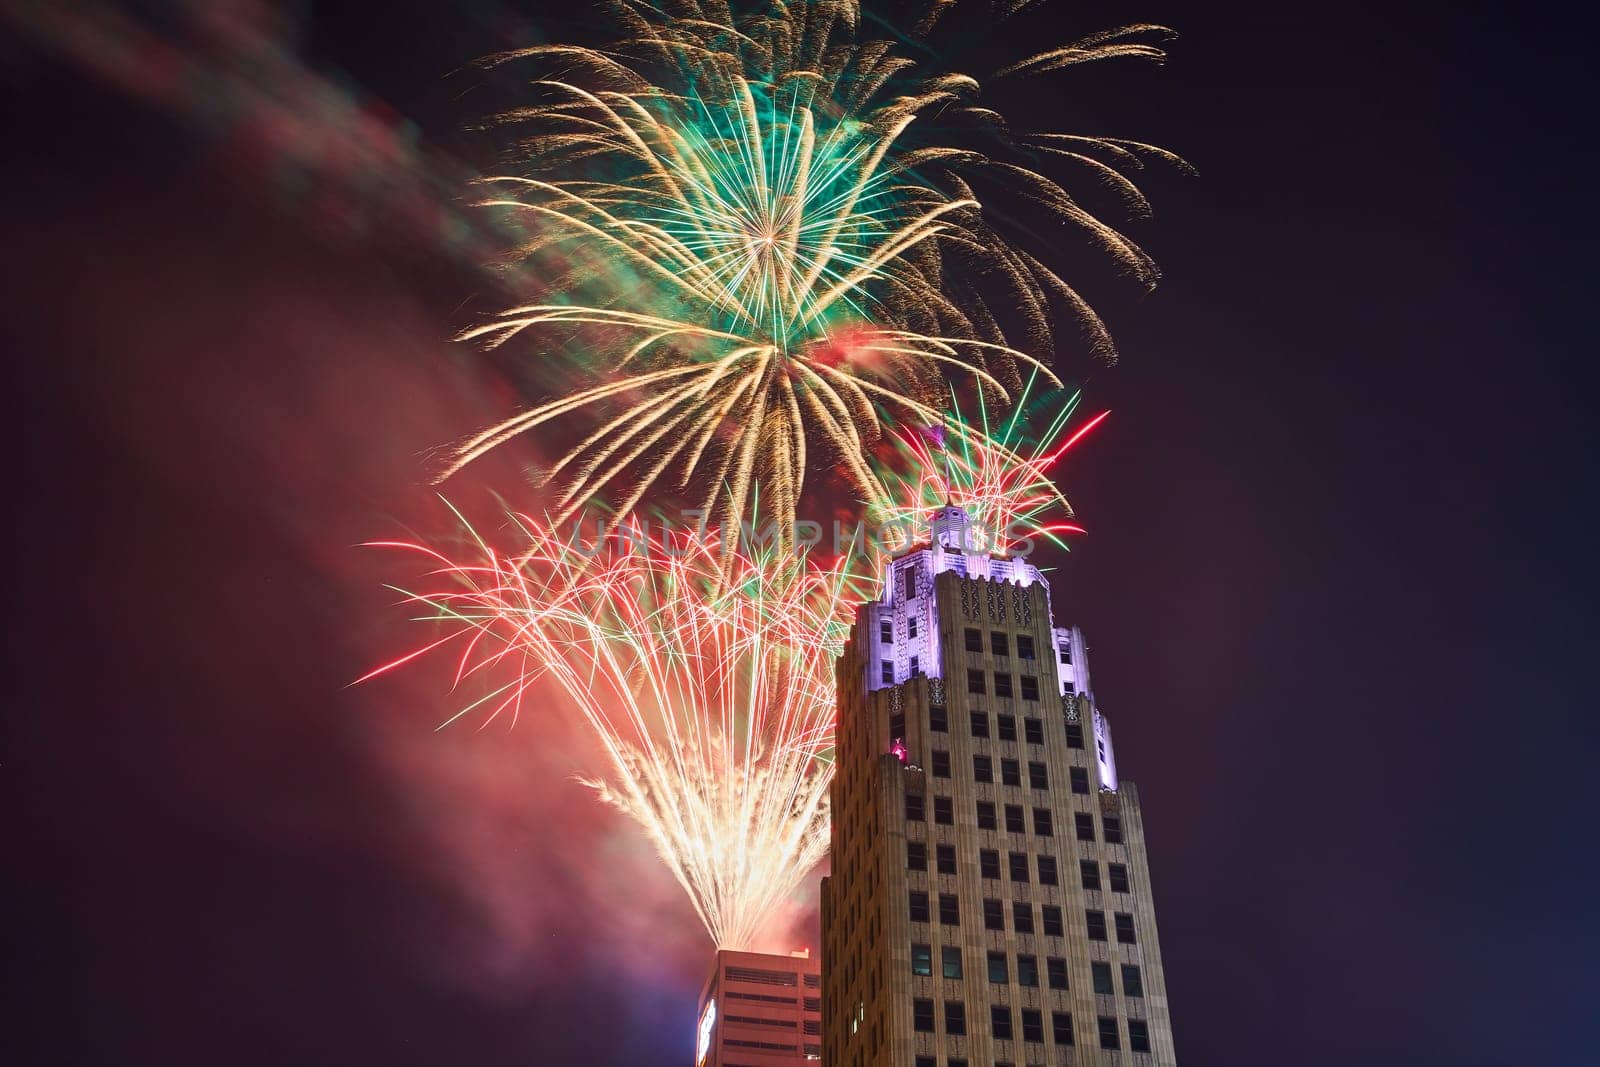 Image of Top of purple Lincoln Tower with dazzling Fourth of July fireworks display in Fort Wayne